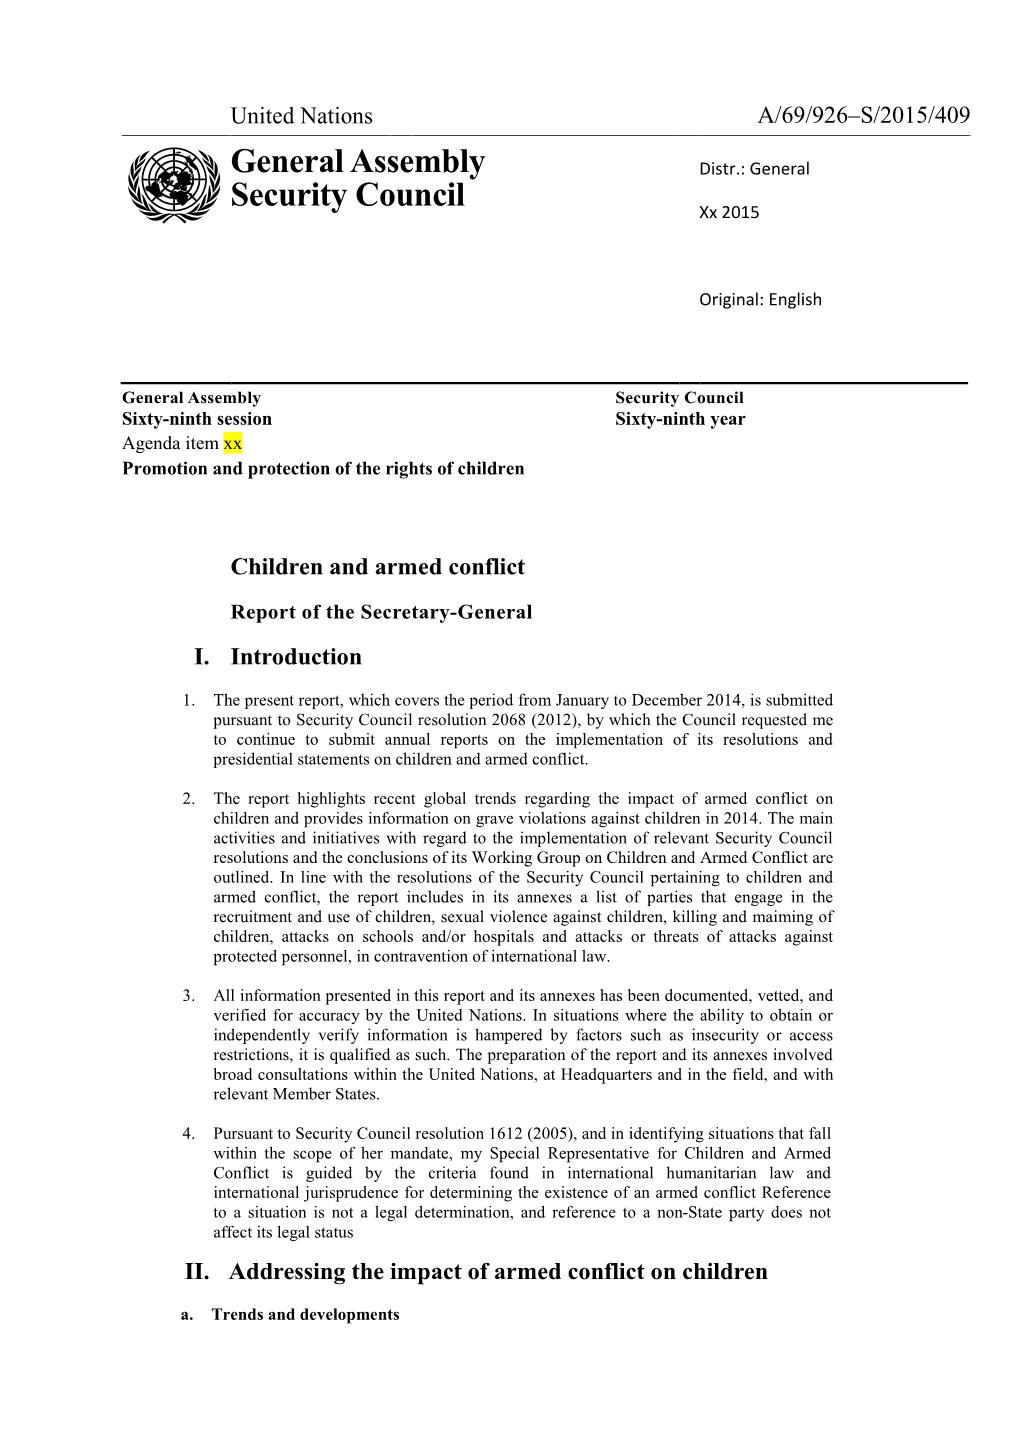 General Assembly Security Council Sixty-Ninth Session Sixty-Ninth Year Agenda Item Xx Promotion and Protection of the Rights of Children